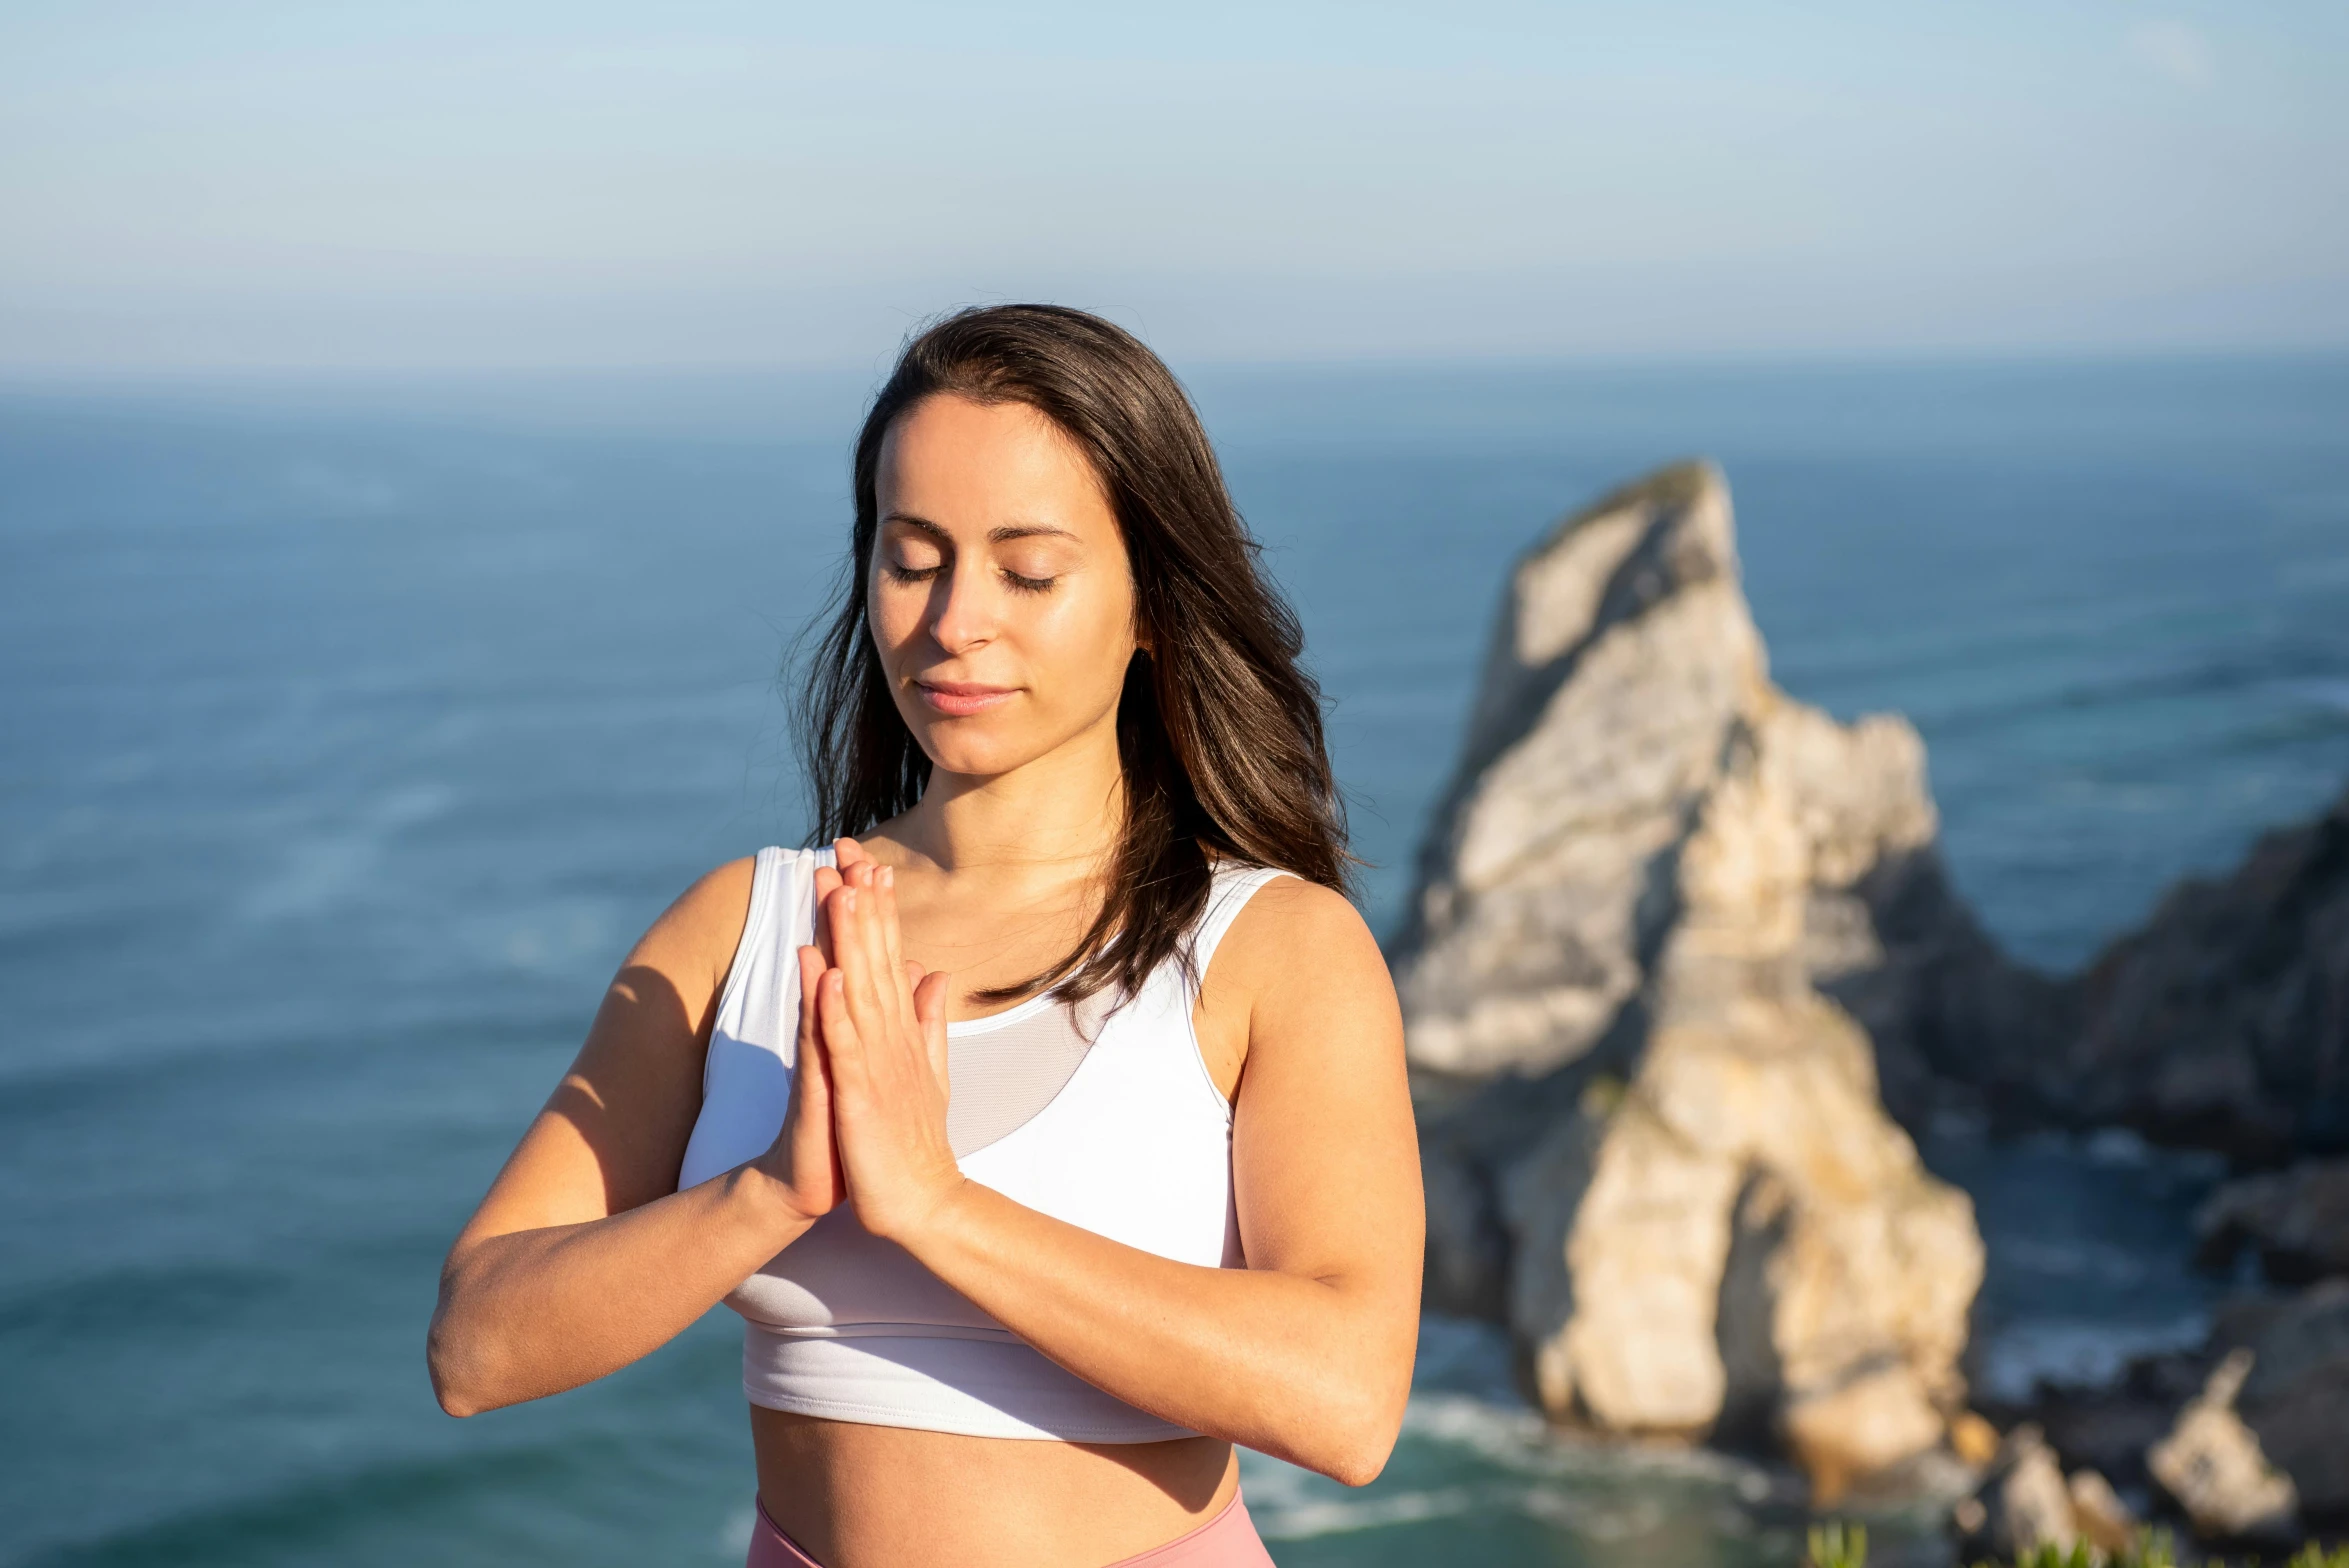 the woman is meditating her energy, with an ocean view in the background